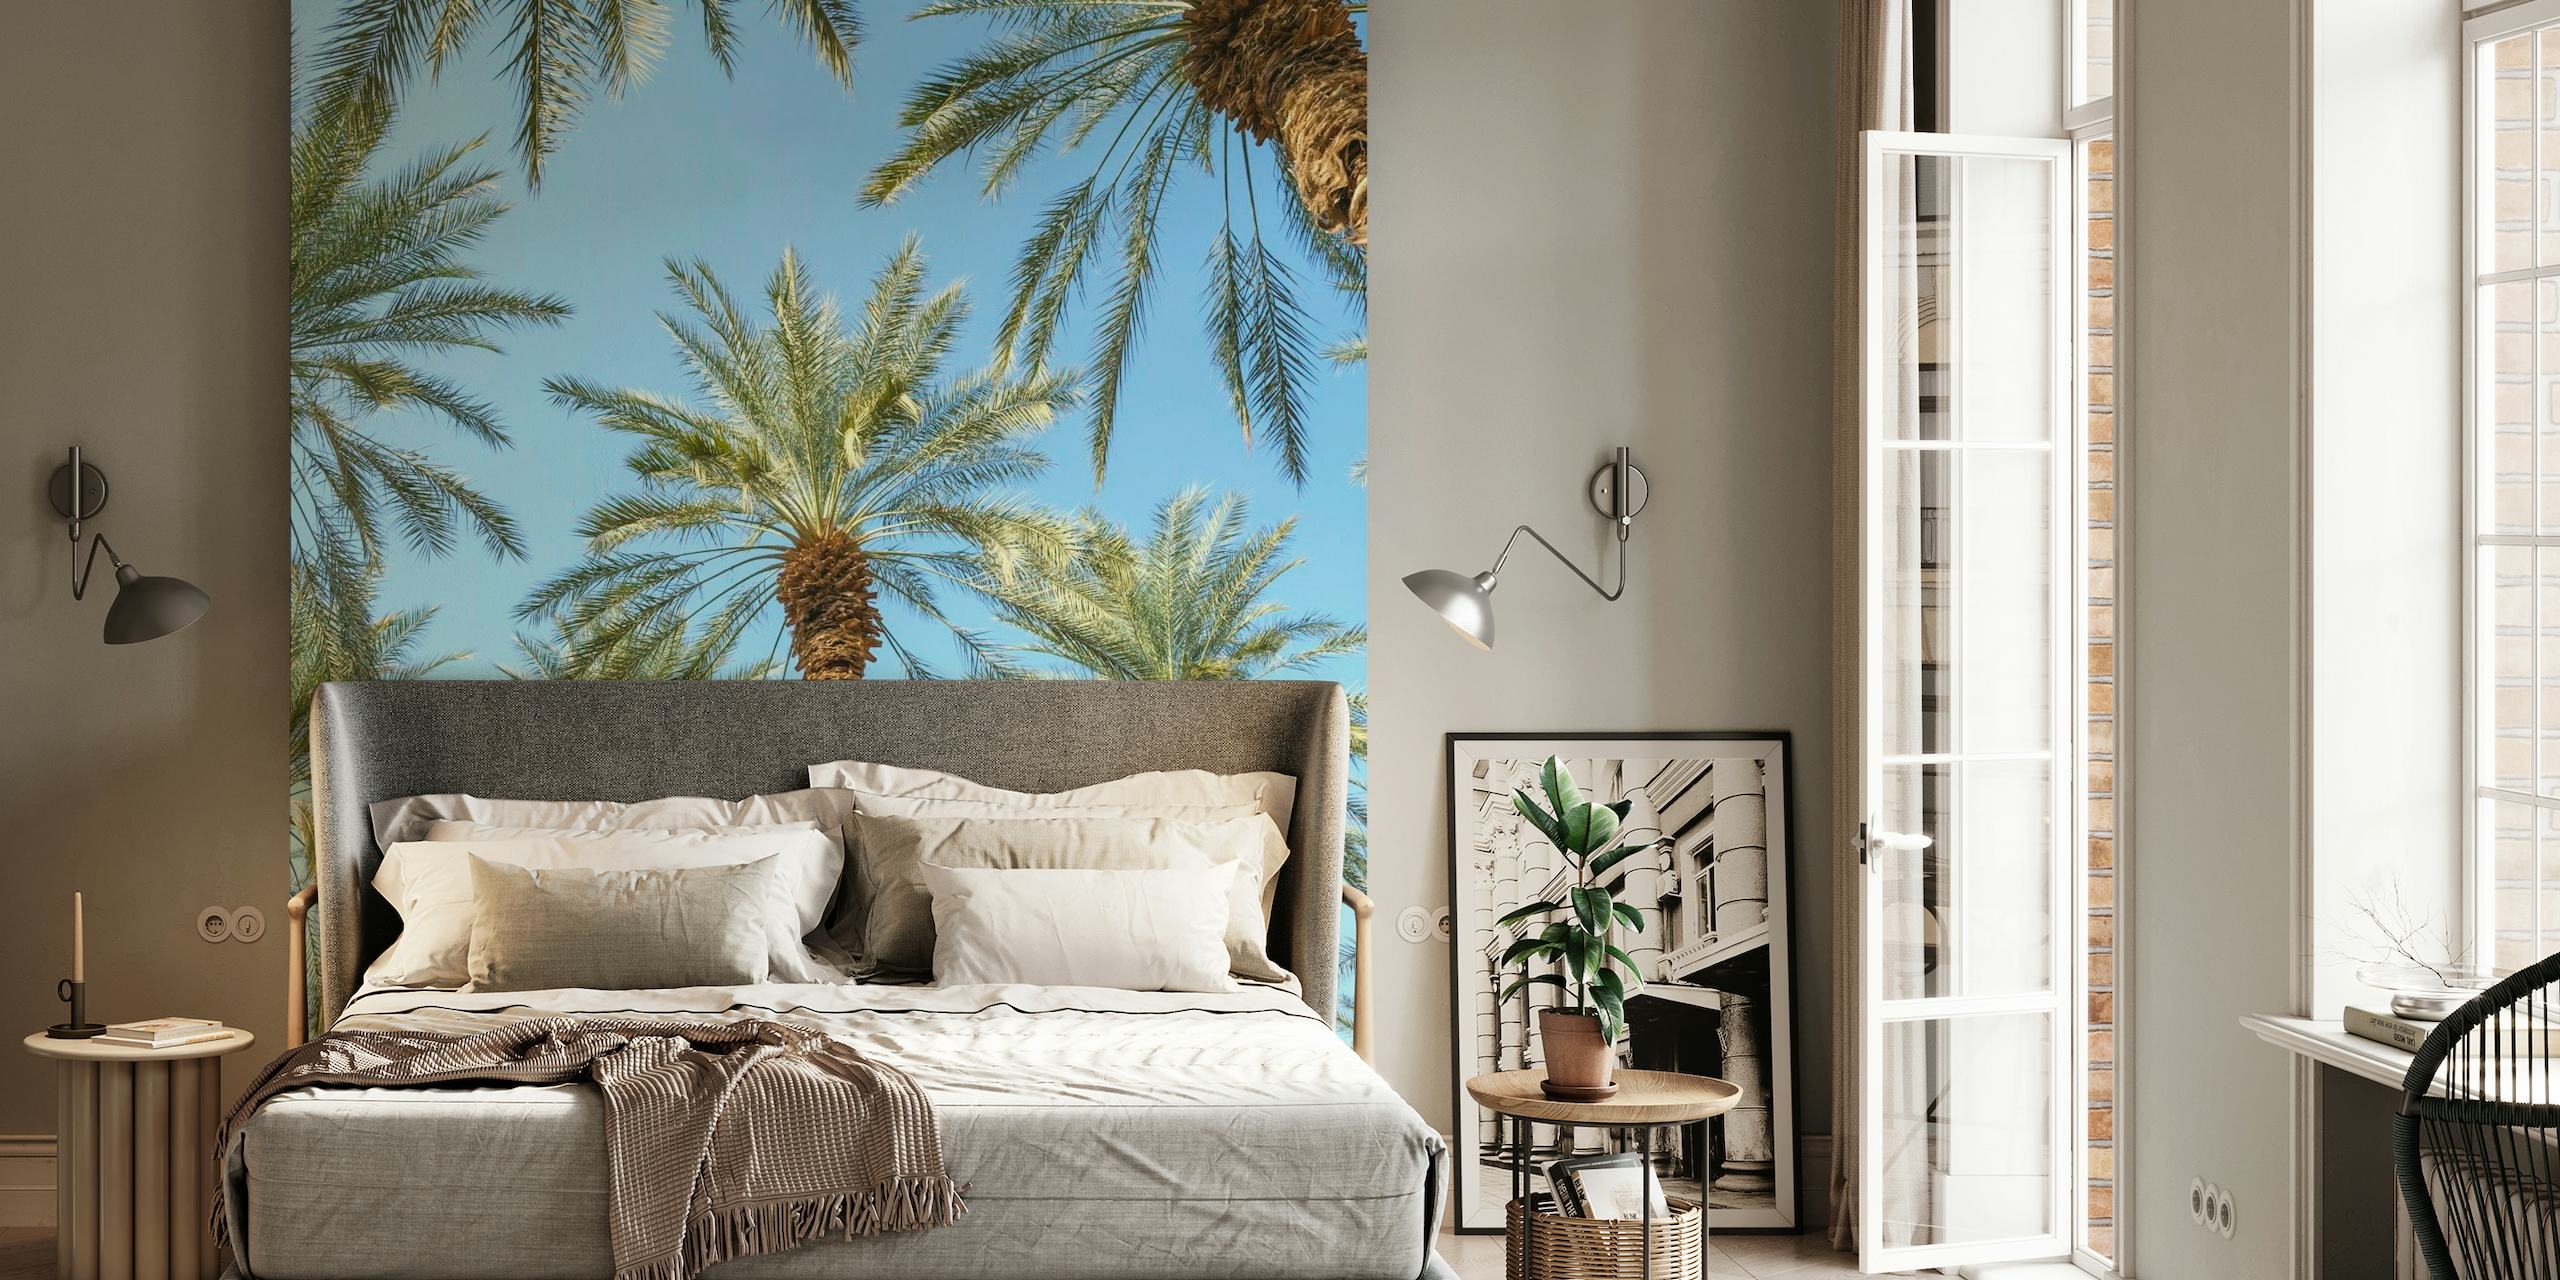 Tropical palm trees wall mural for a serene home decor ambiance.